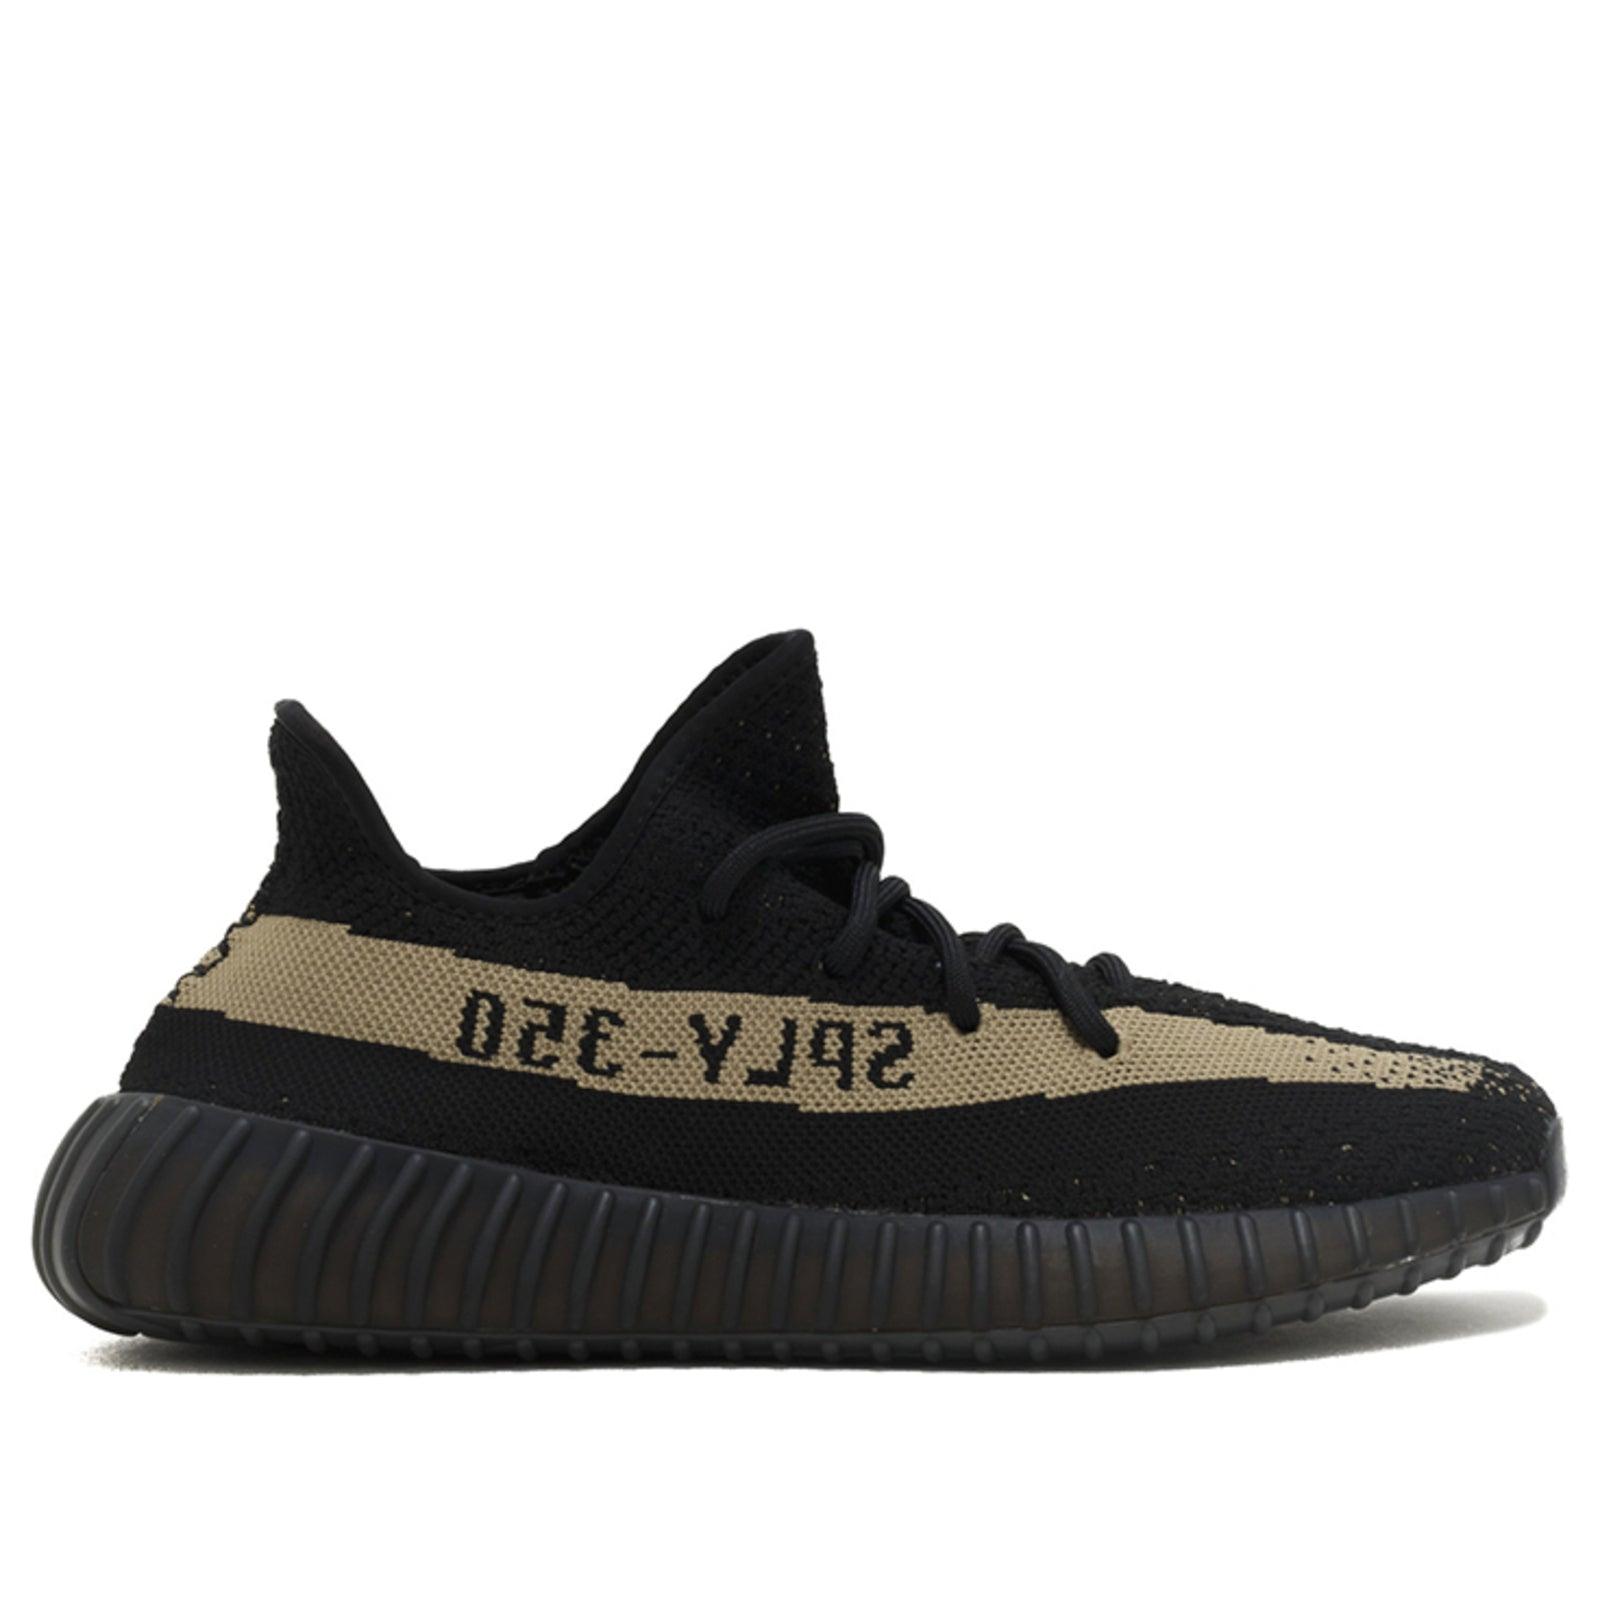 ADIDAS YEEZY BOOST 350 V2 CORE BLACK GREEN BY9611 - CADEAUME